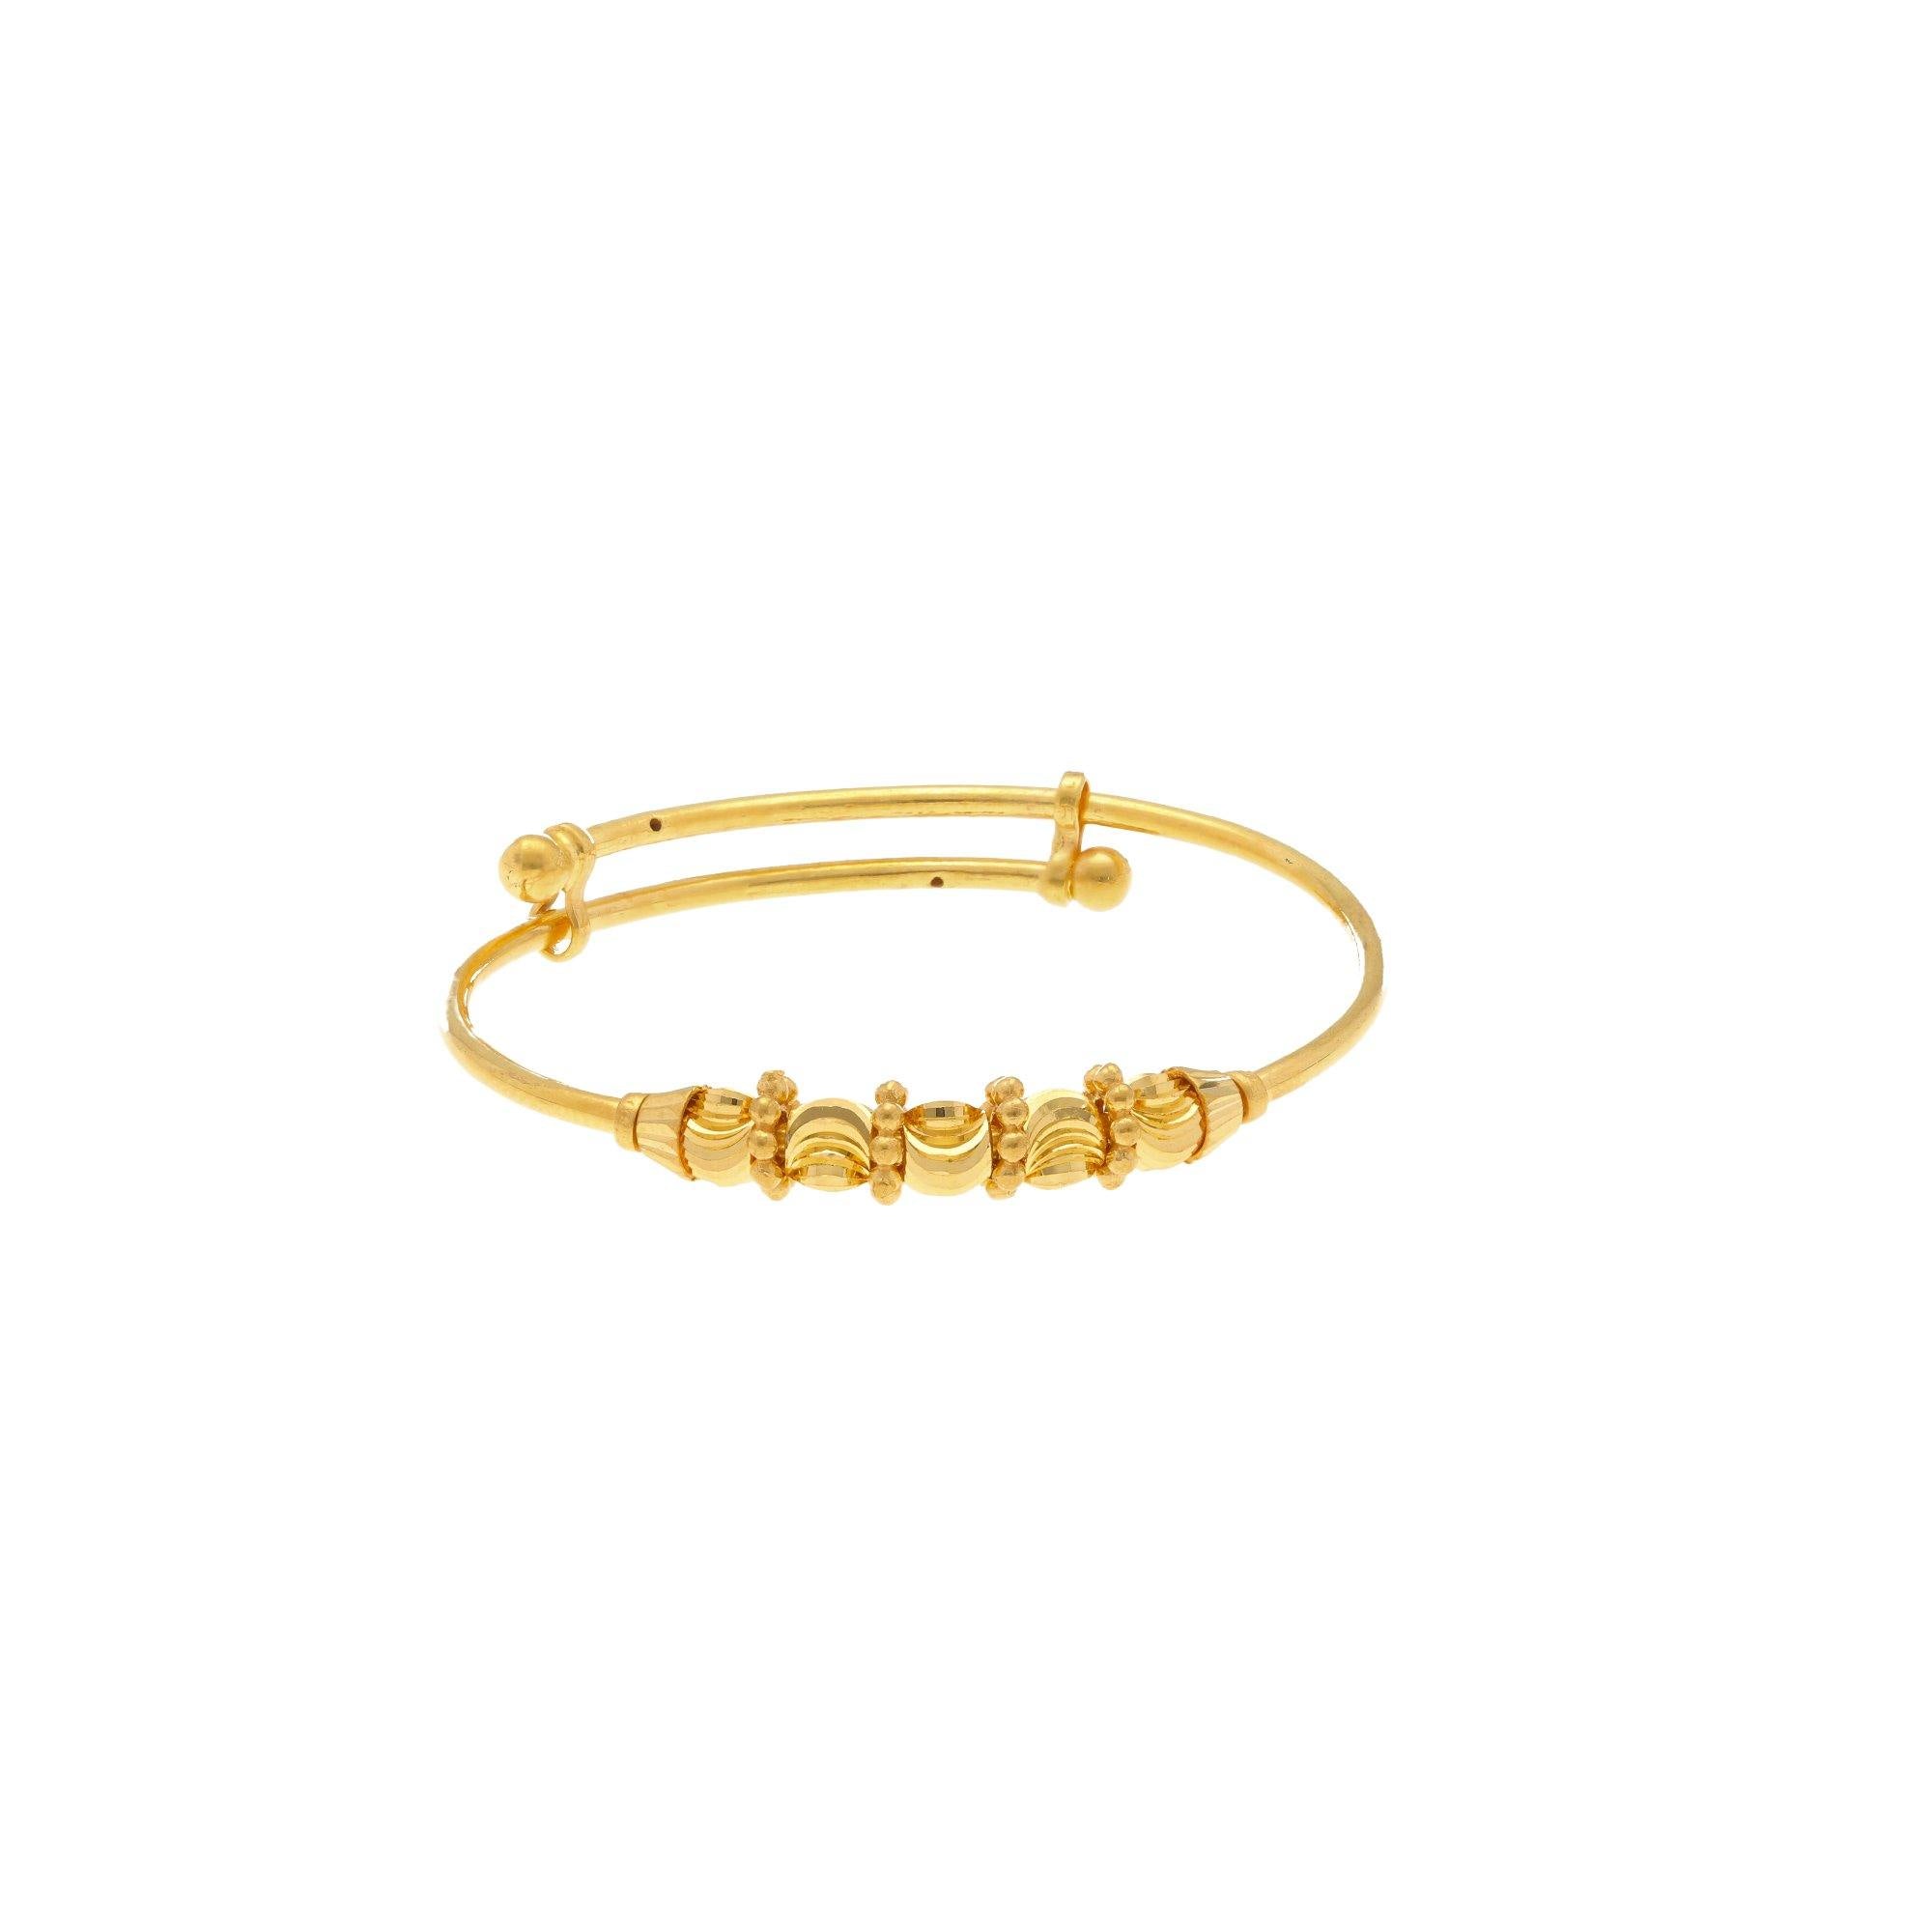 Buy CANDERE - A KALYAN JEWELLERS COMPANY 22K Ethnic Collection Tushi Bangle  for Women (Yellow Gold) 916 at Amazon.in